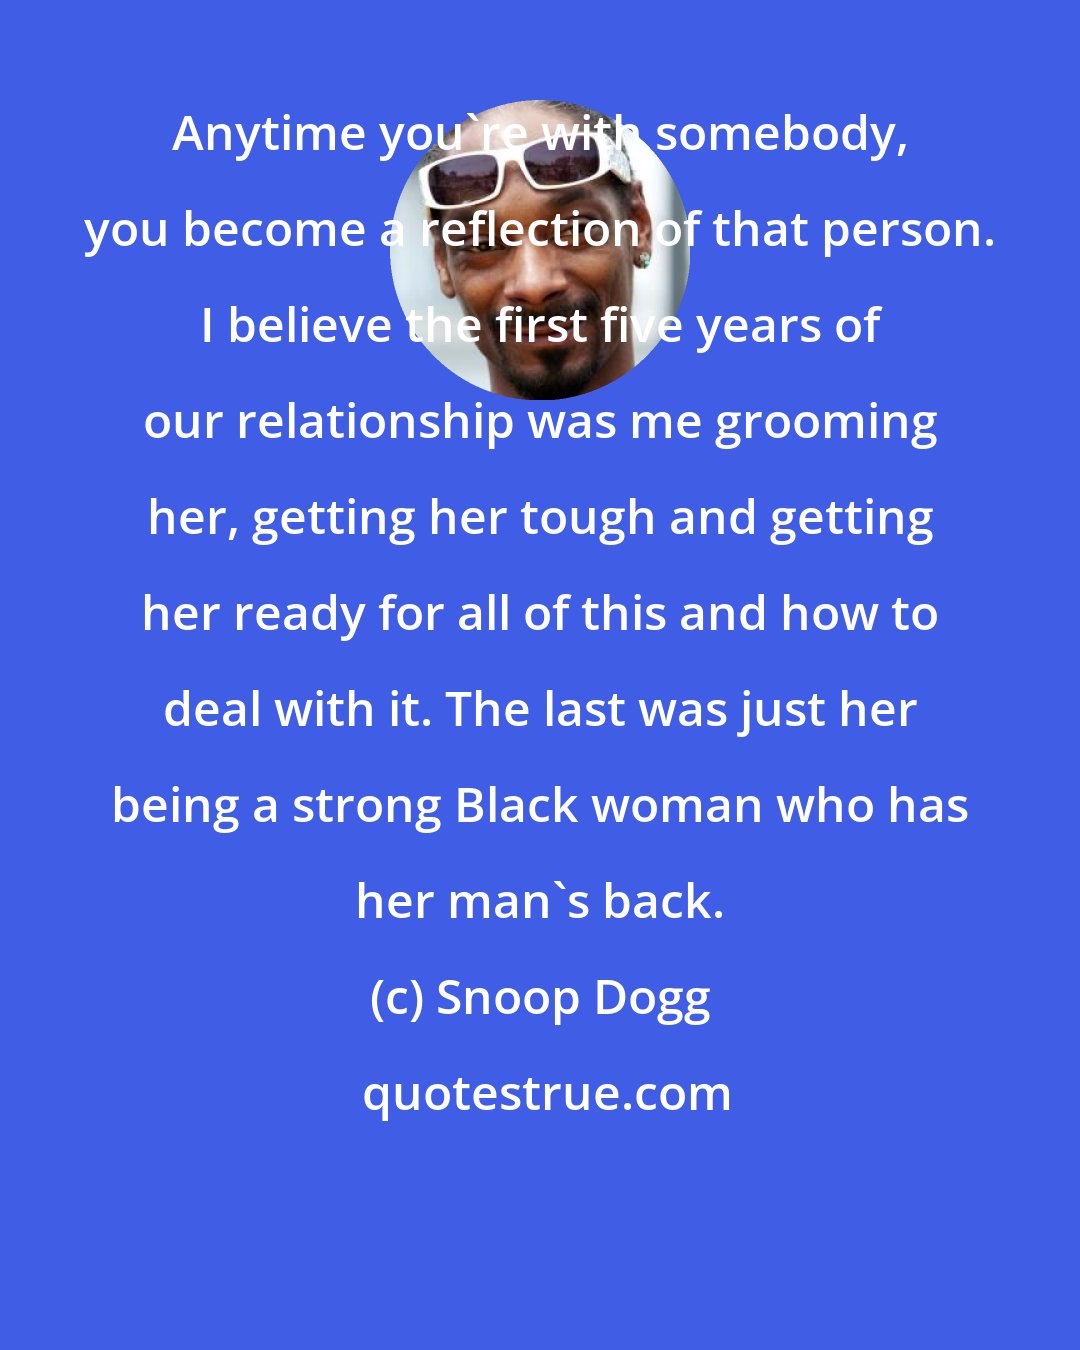 Snoop Dogg: Anytime you're with somebody, you become a reflection of that person. I believe the first five years of our relationship was me grooming her, getting her tough and getting her ready for all of this and how to deal with it. The last was just her being a strong Black woman who has her man's back.